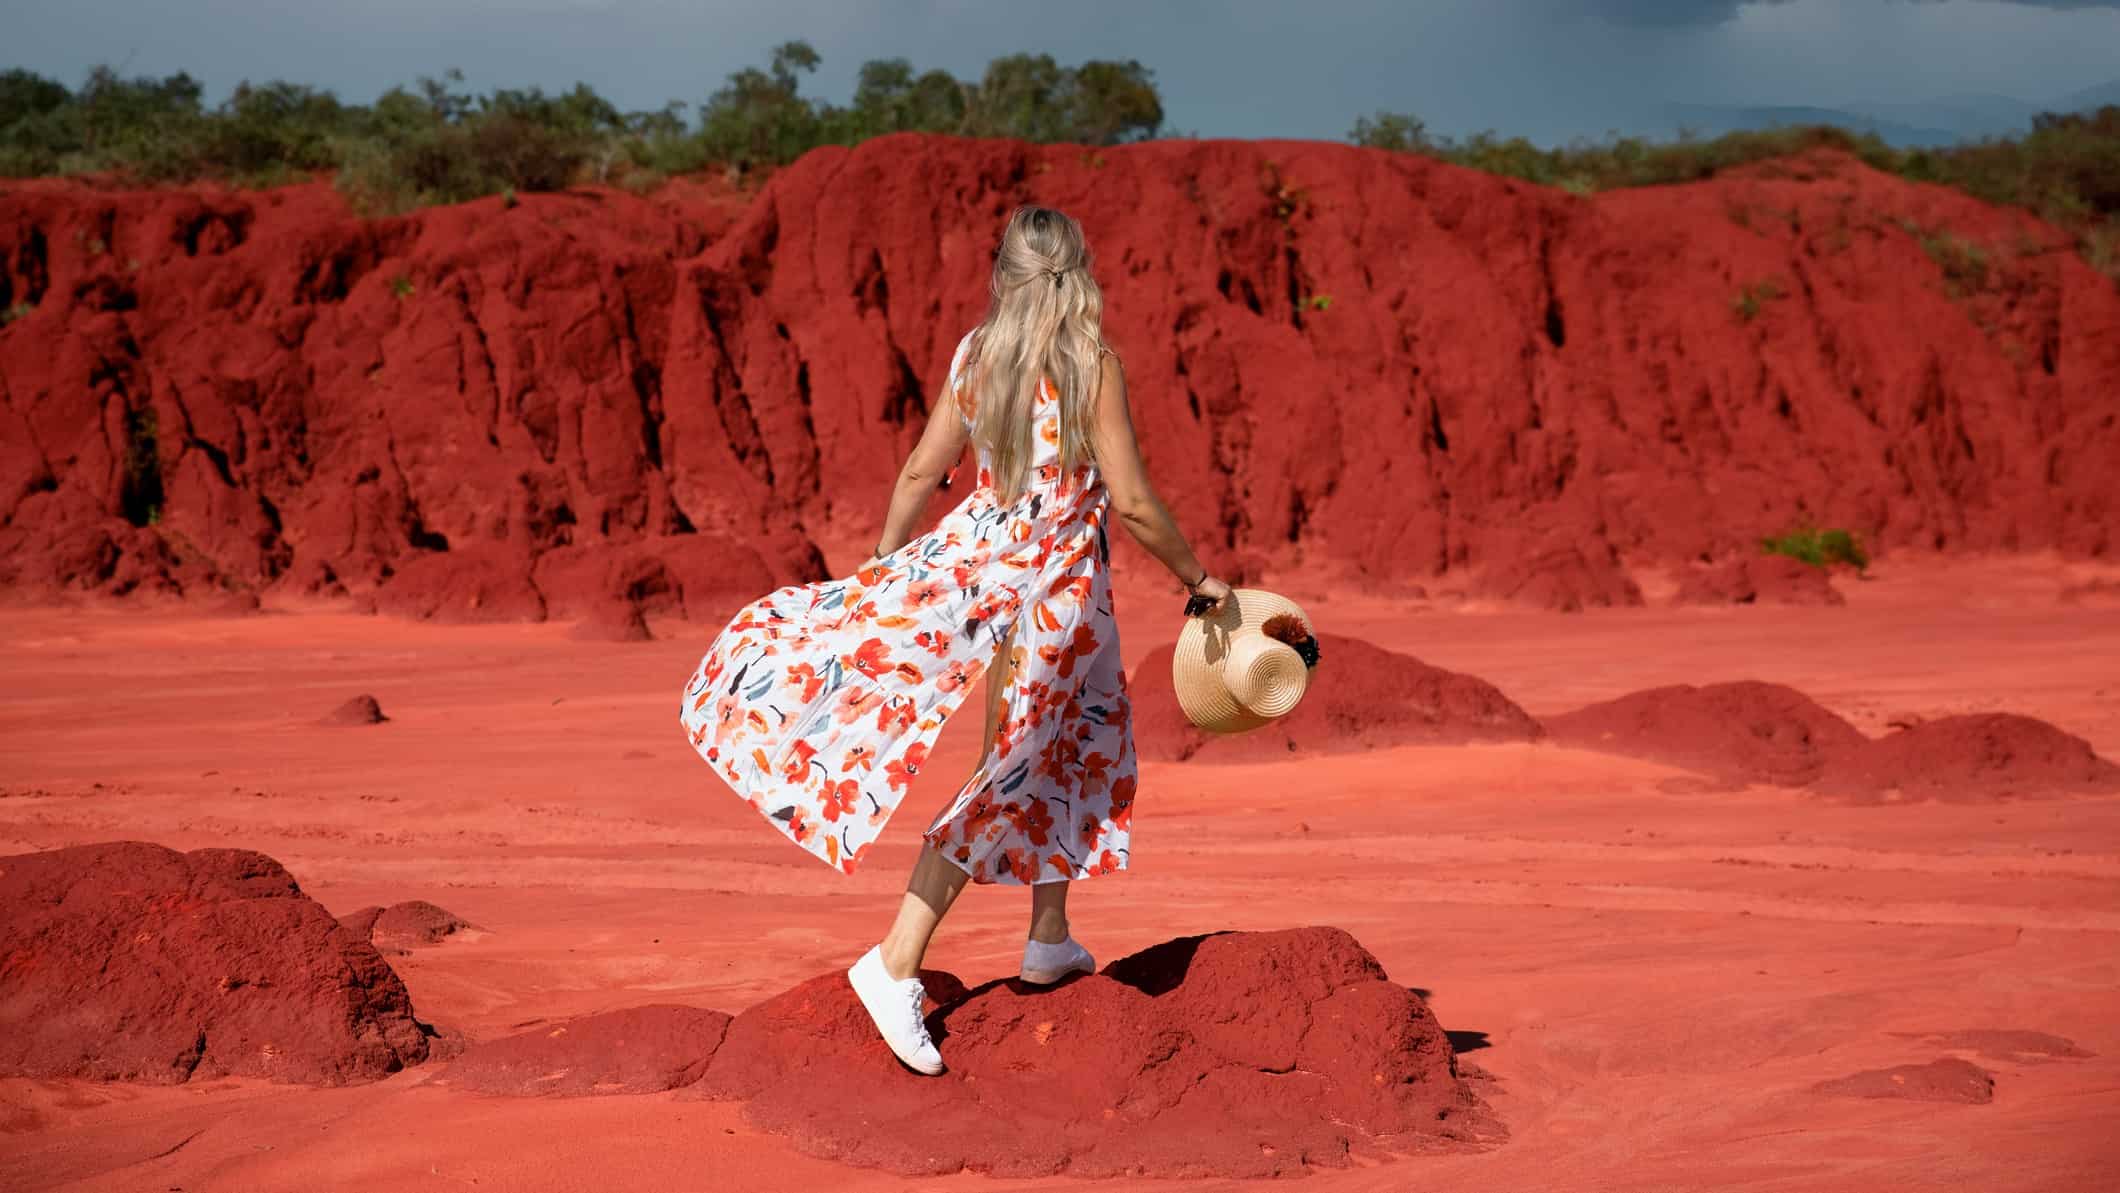 a woman in a flowing dress stands against the backdrop of red iron ore rich dirt as in central Australia.